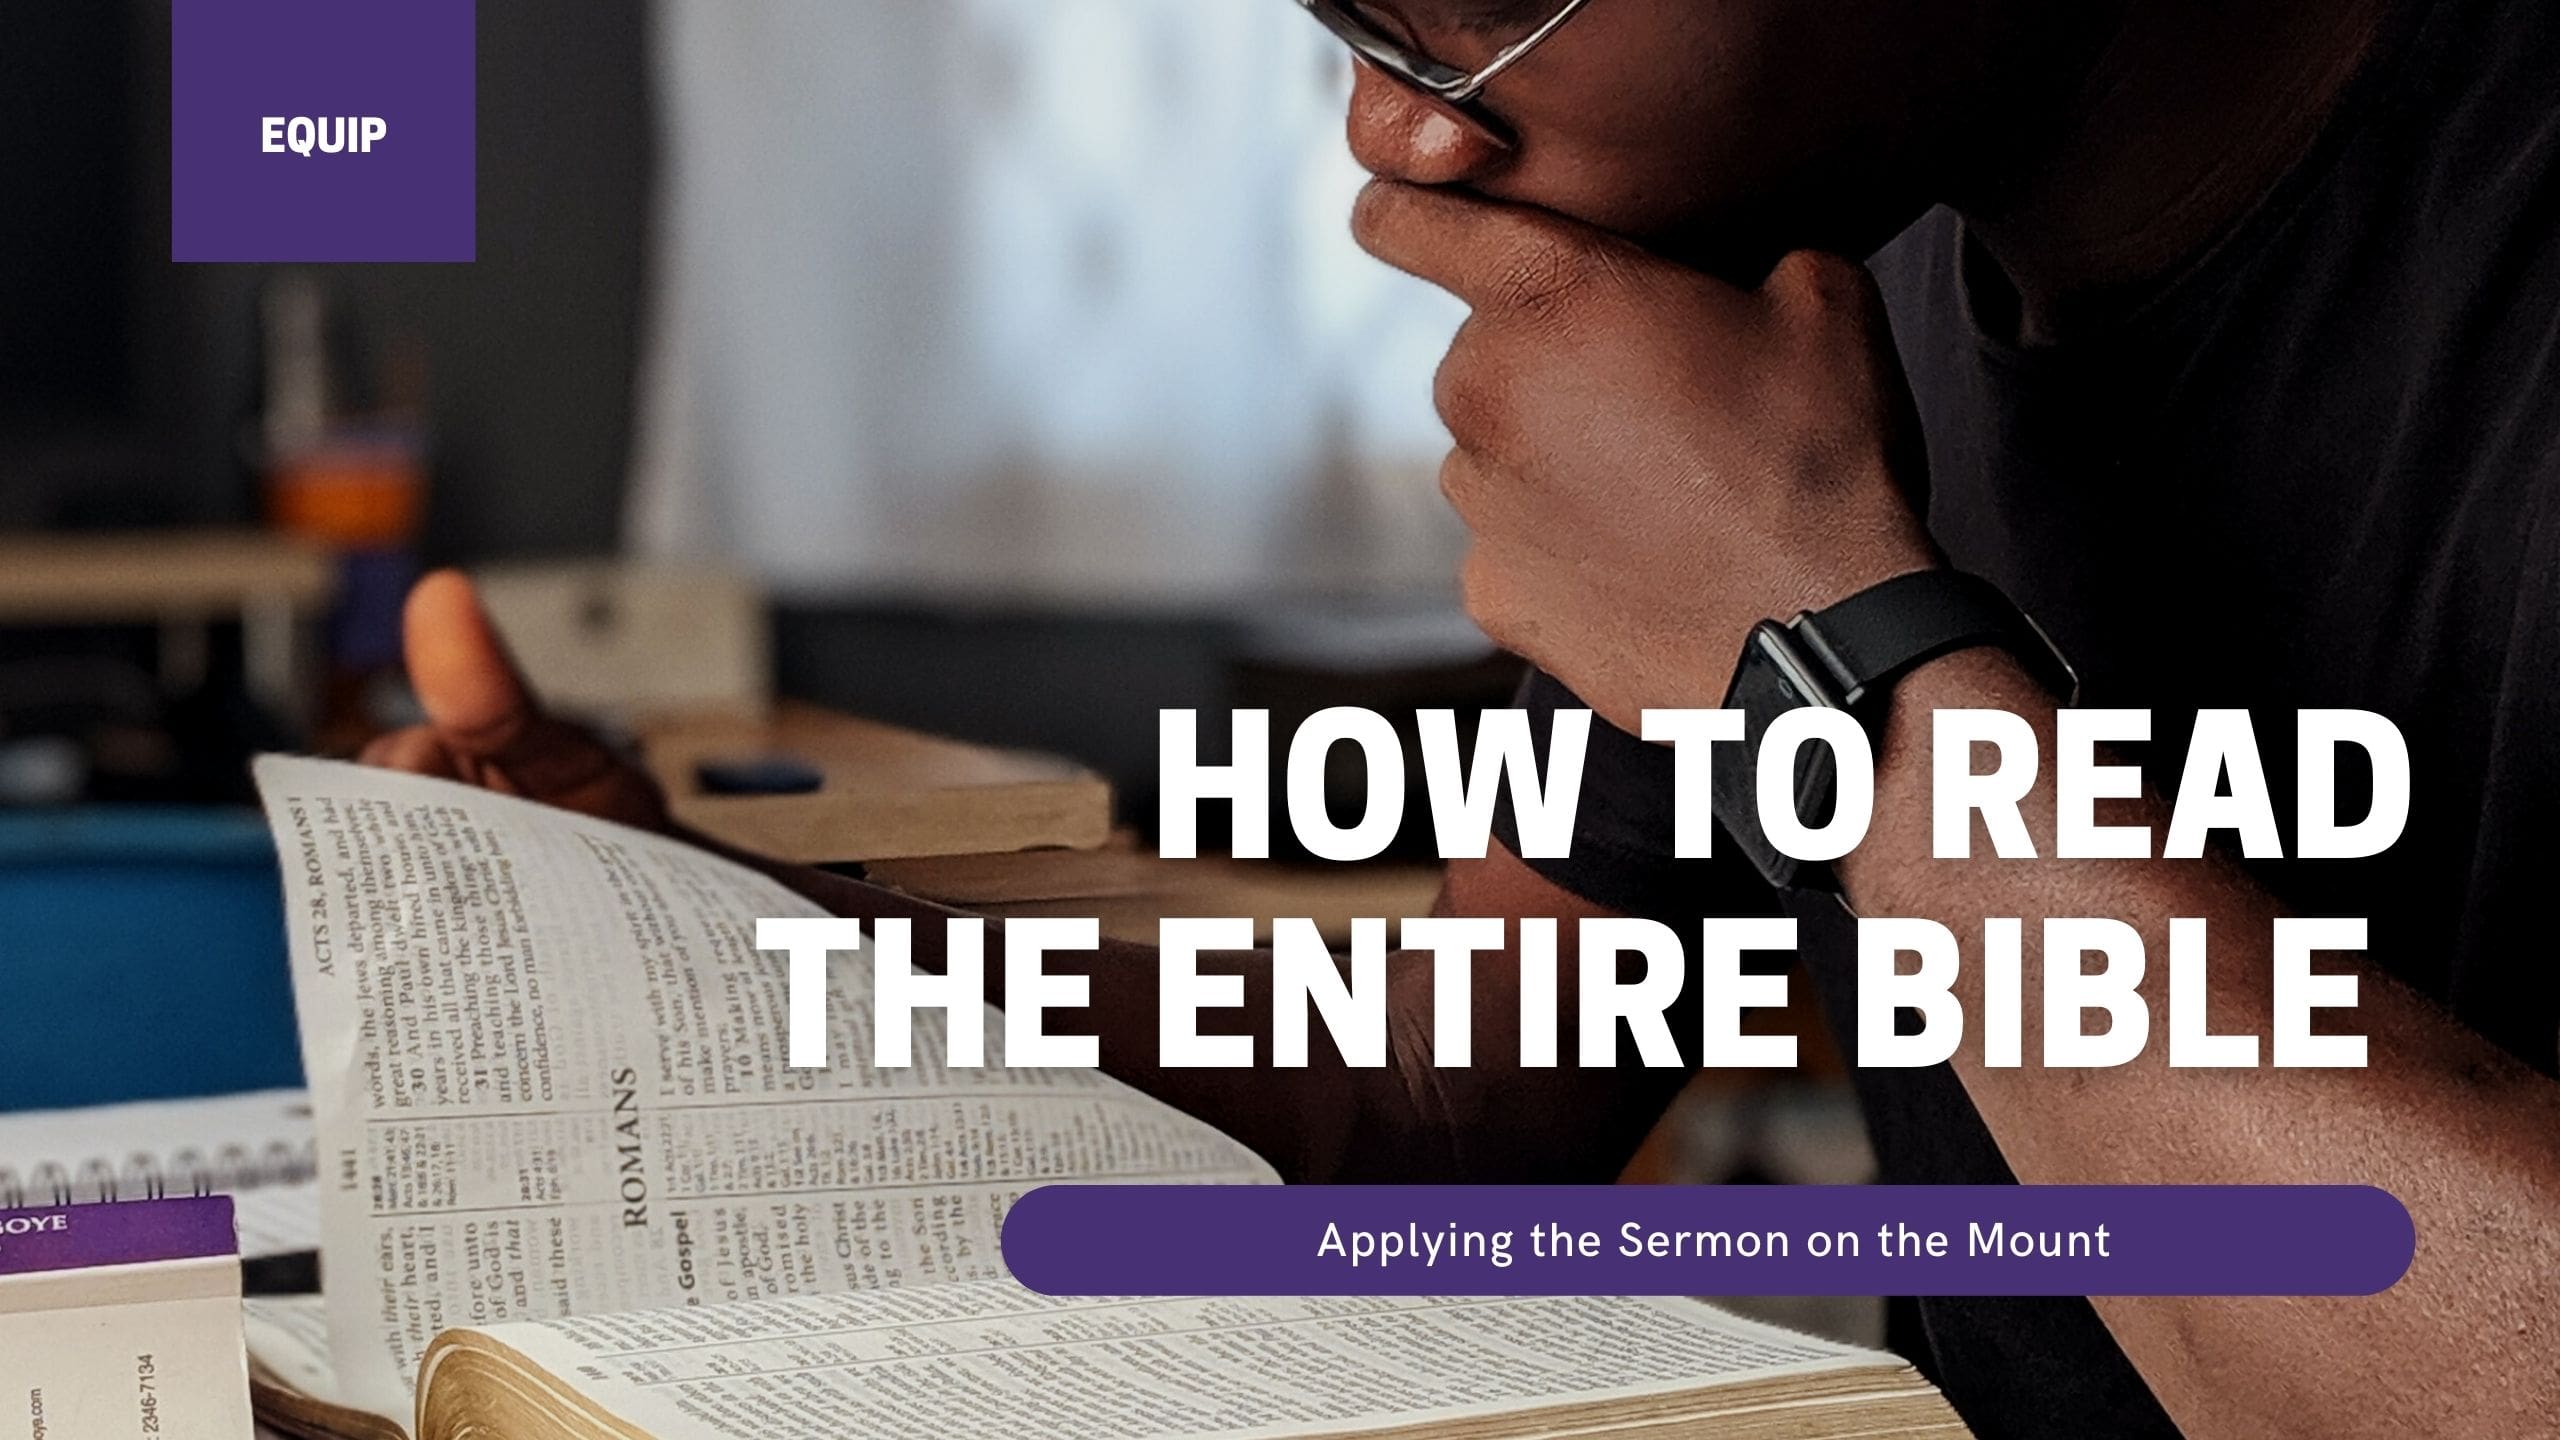 How to Read the Entire Bible